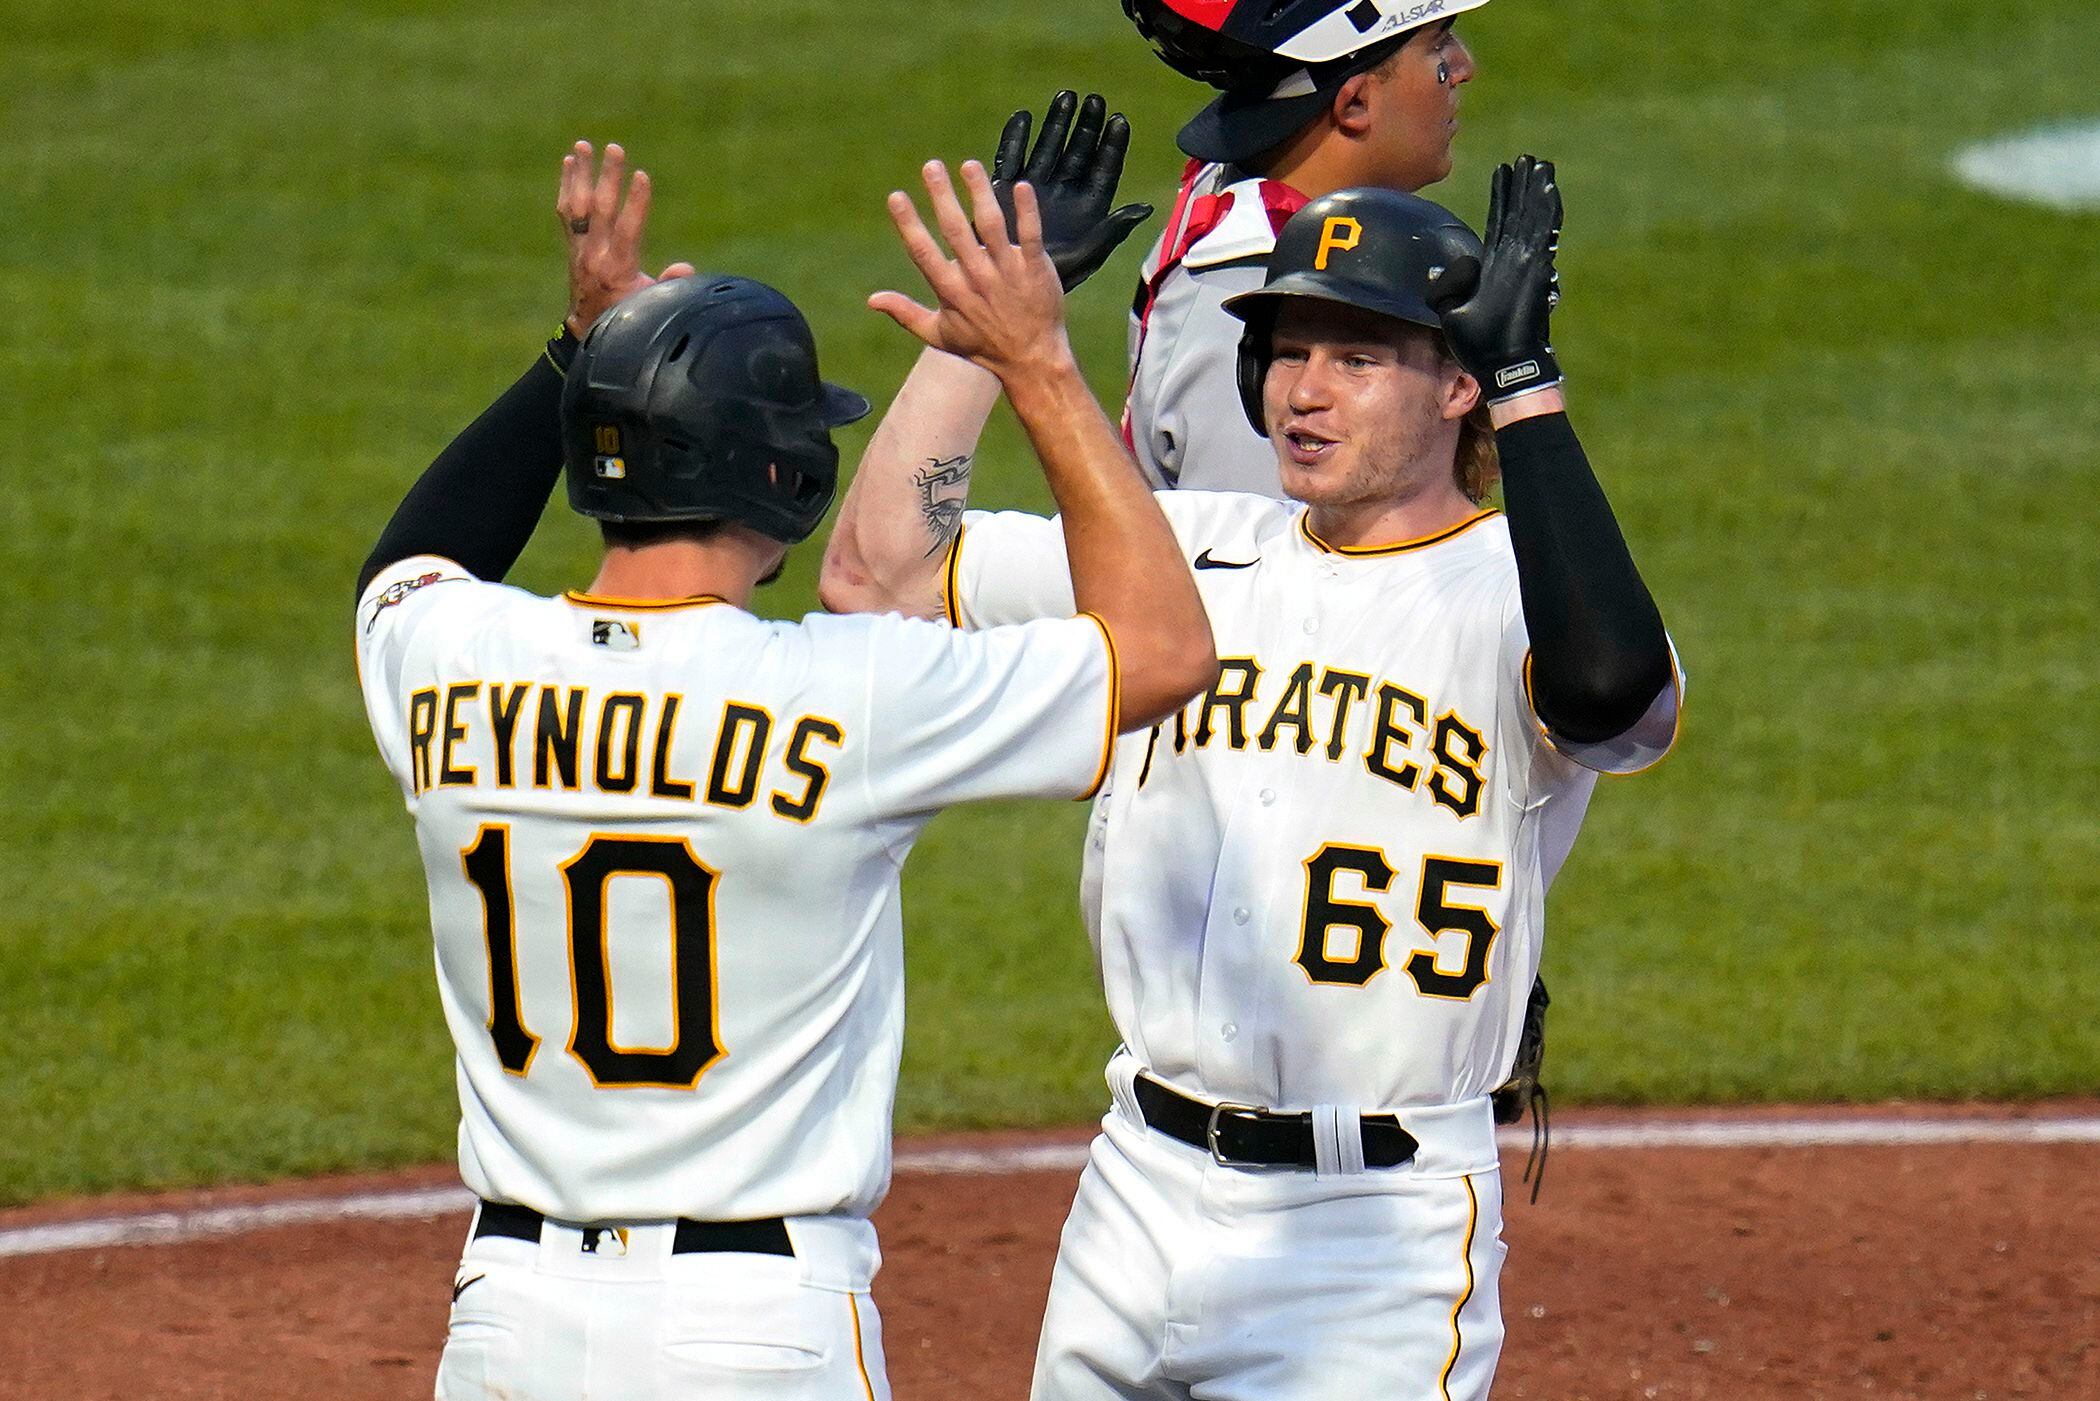 Pirates turn two to end game, 10/05/2022